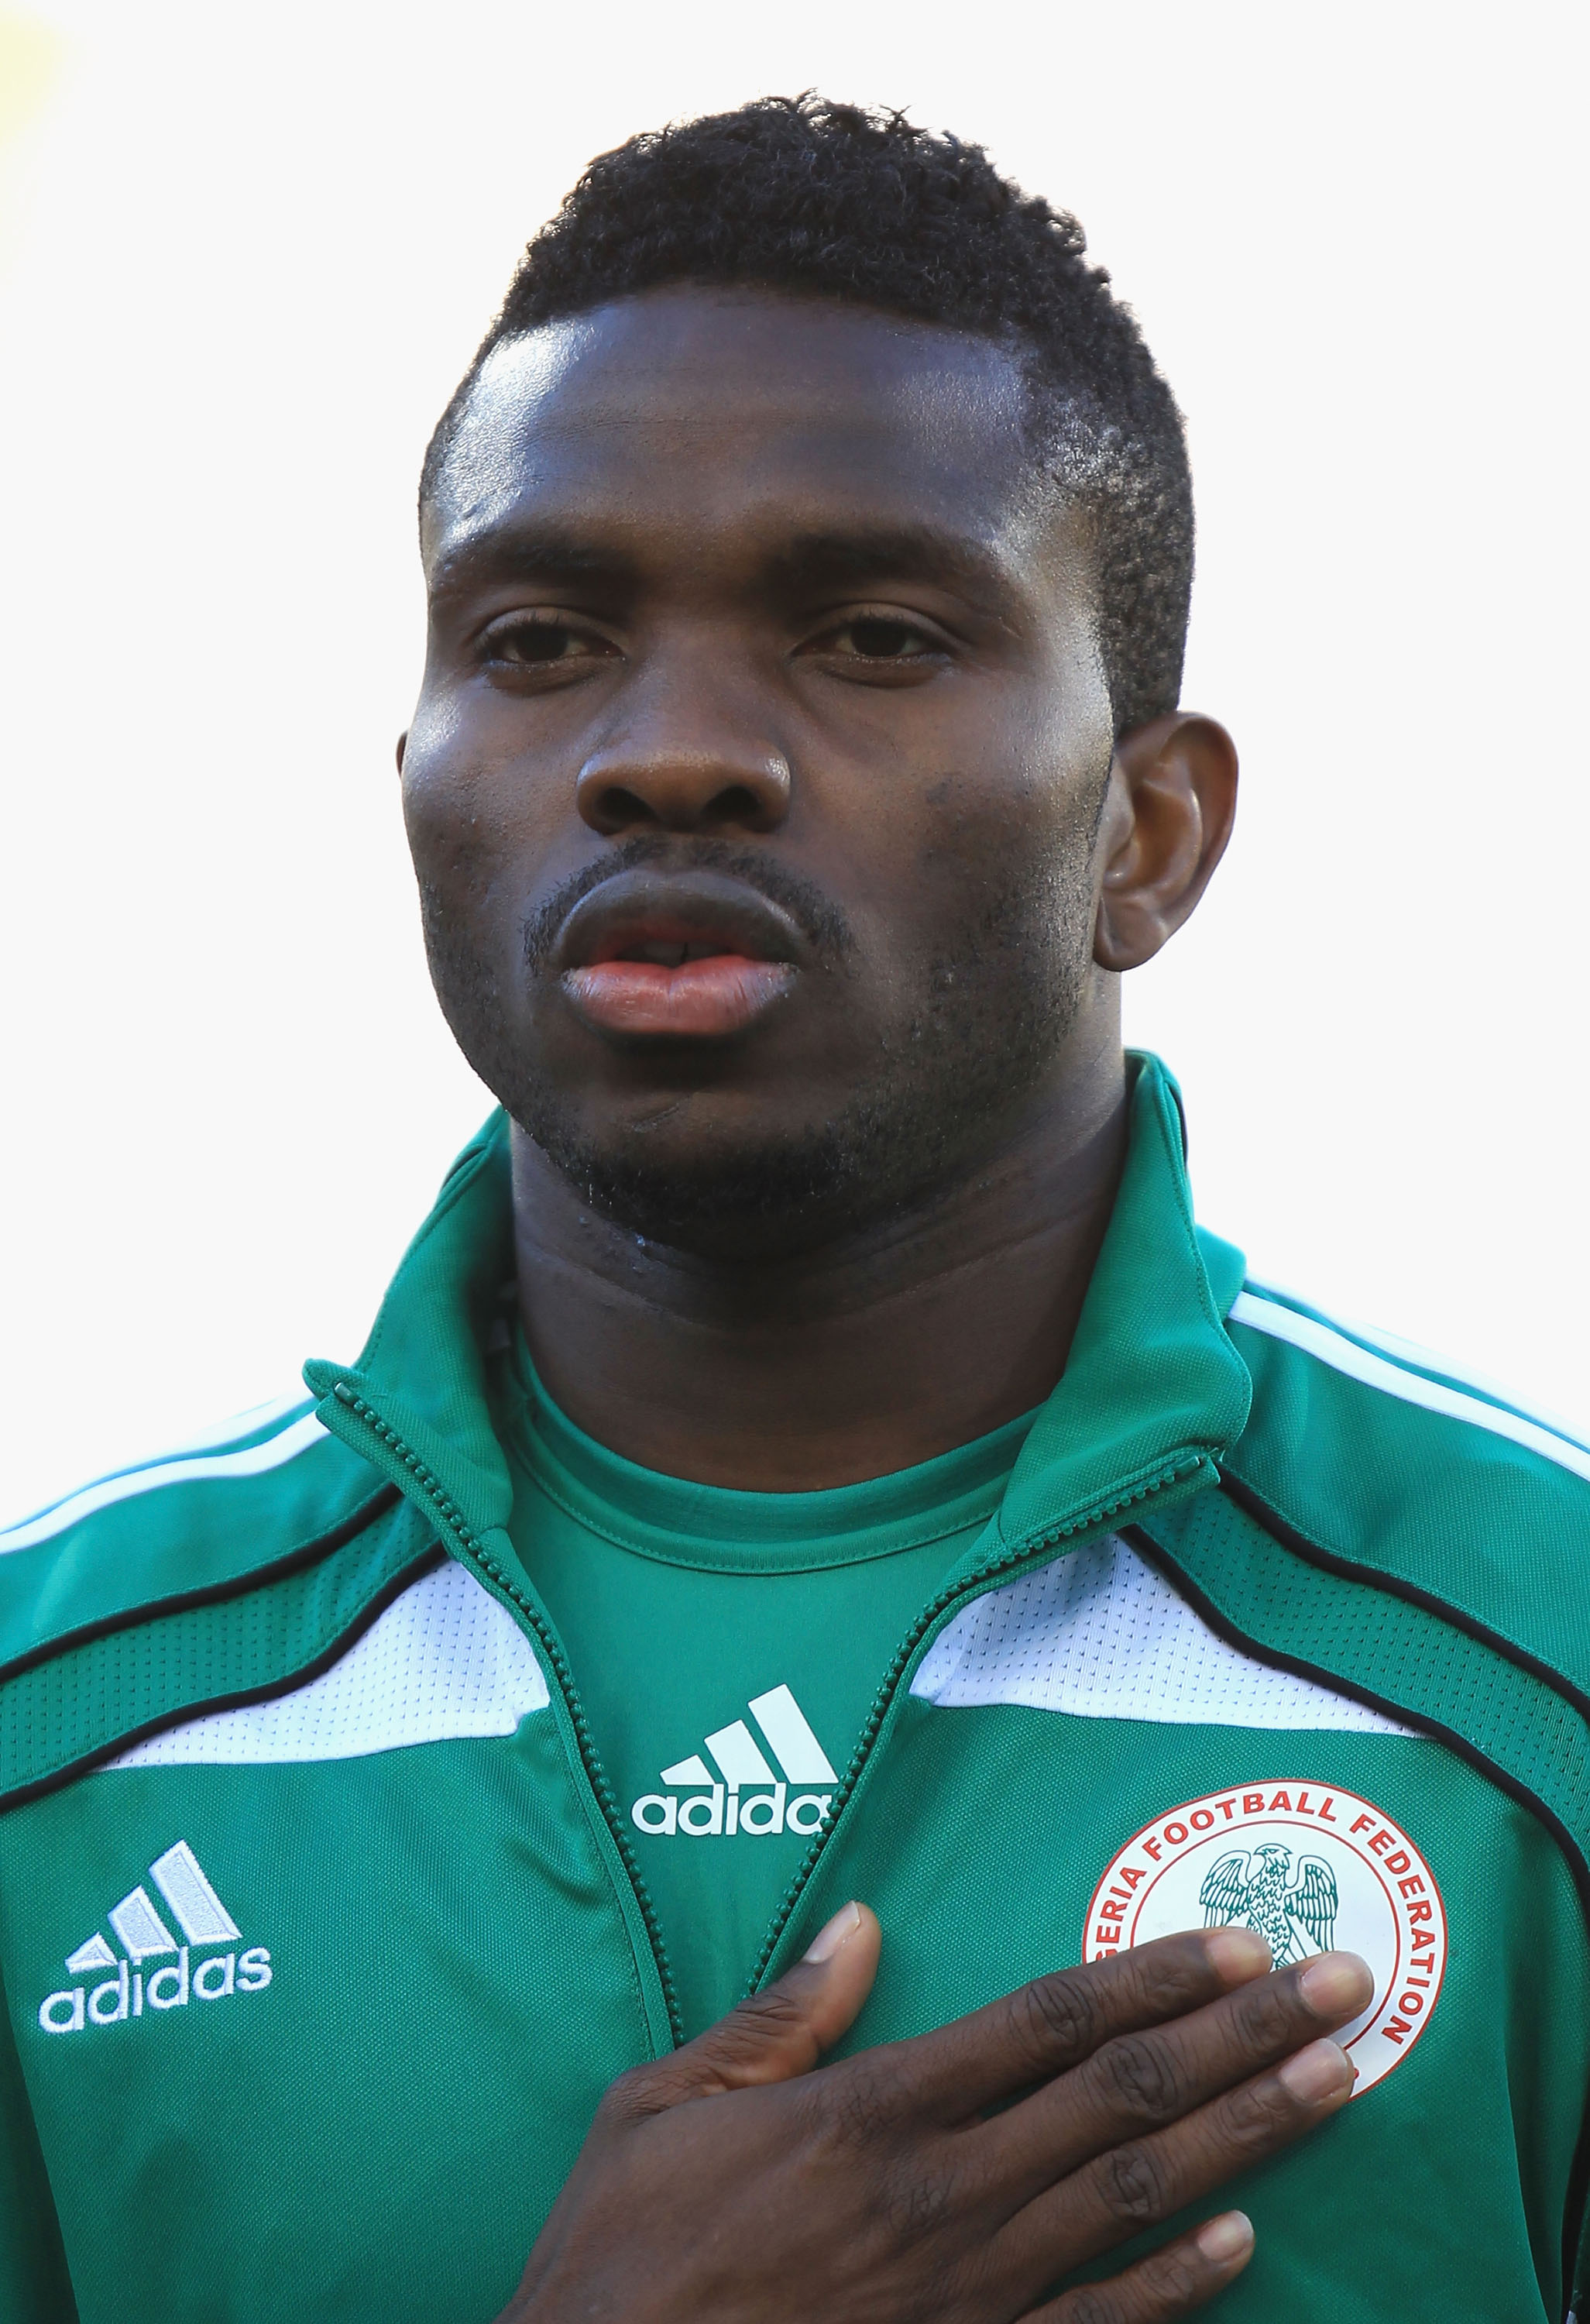 BLOEMFONTEIN, SOUTH AFRICA - JUNE 17:  Joseph Yobo of Nigeria ahead of the 2010 FIFA World Cup South Africa Group B match between Greece and Nigeria at the Free State Stadium on June 17, 2010 in Mangaung/Bloemfontein, South Africa.  (Photo by Martin Rose/